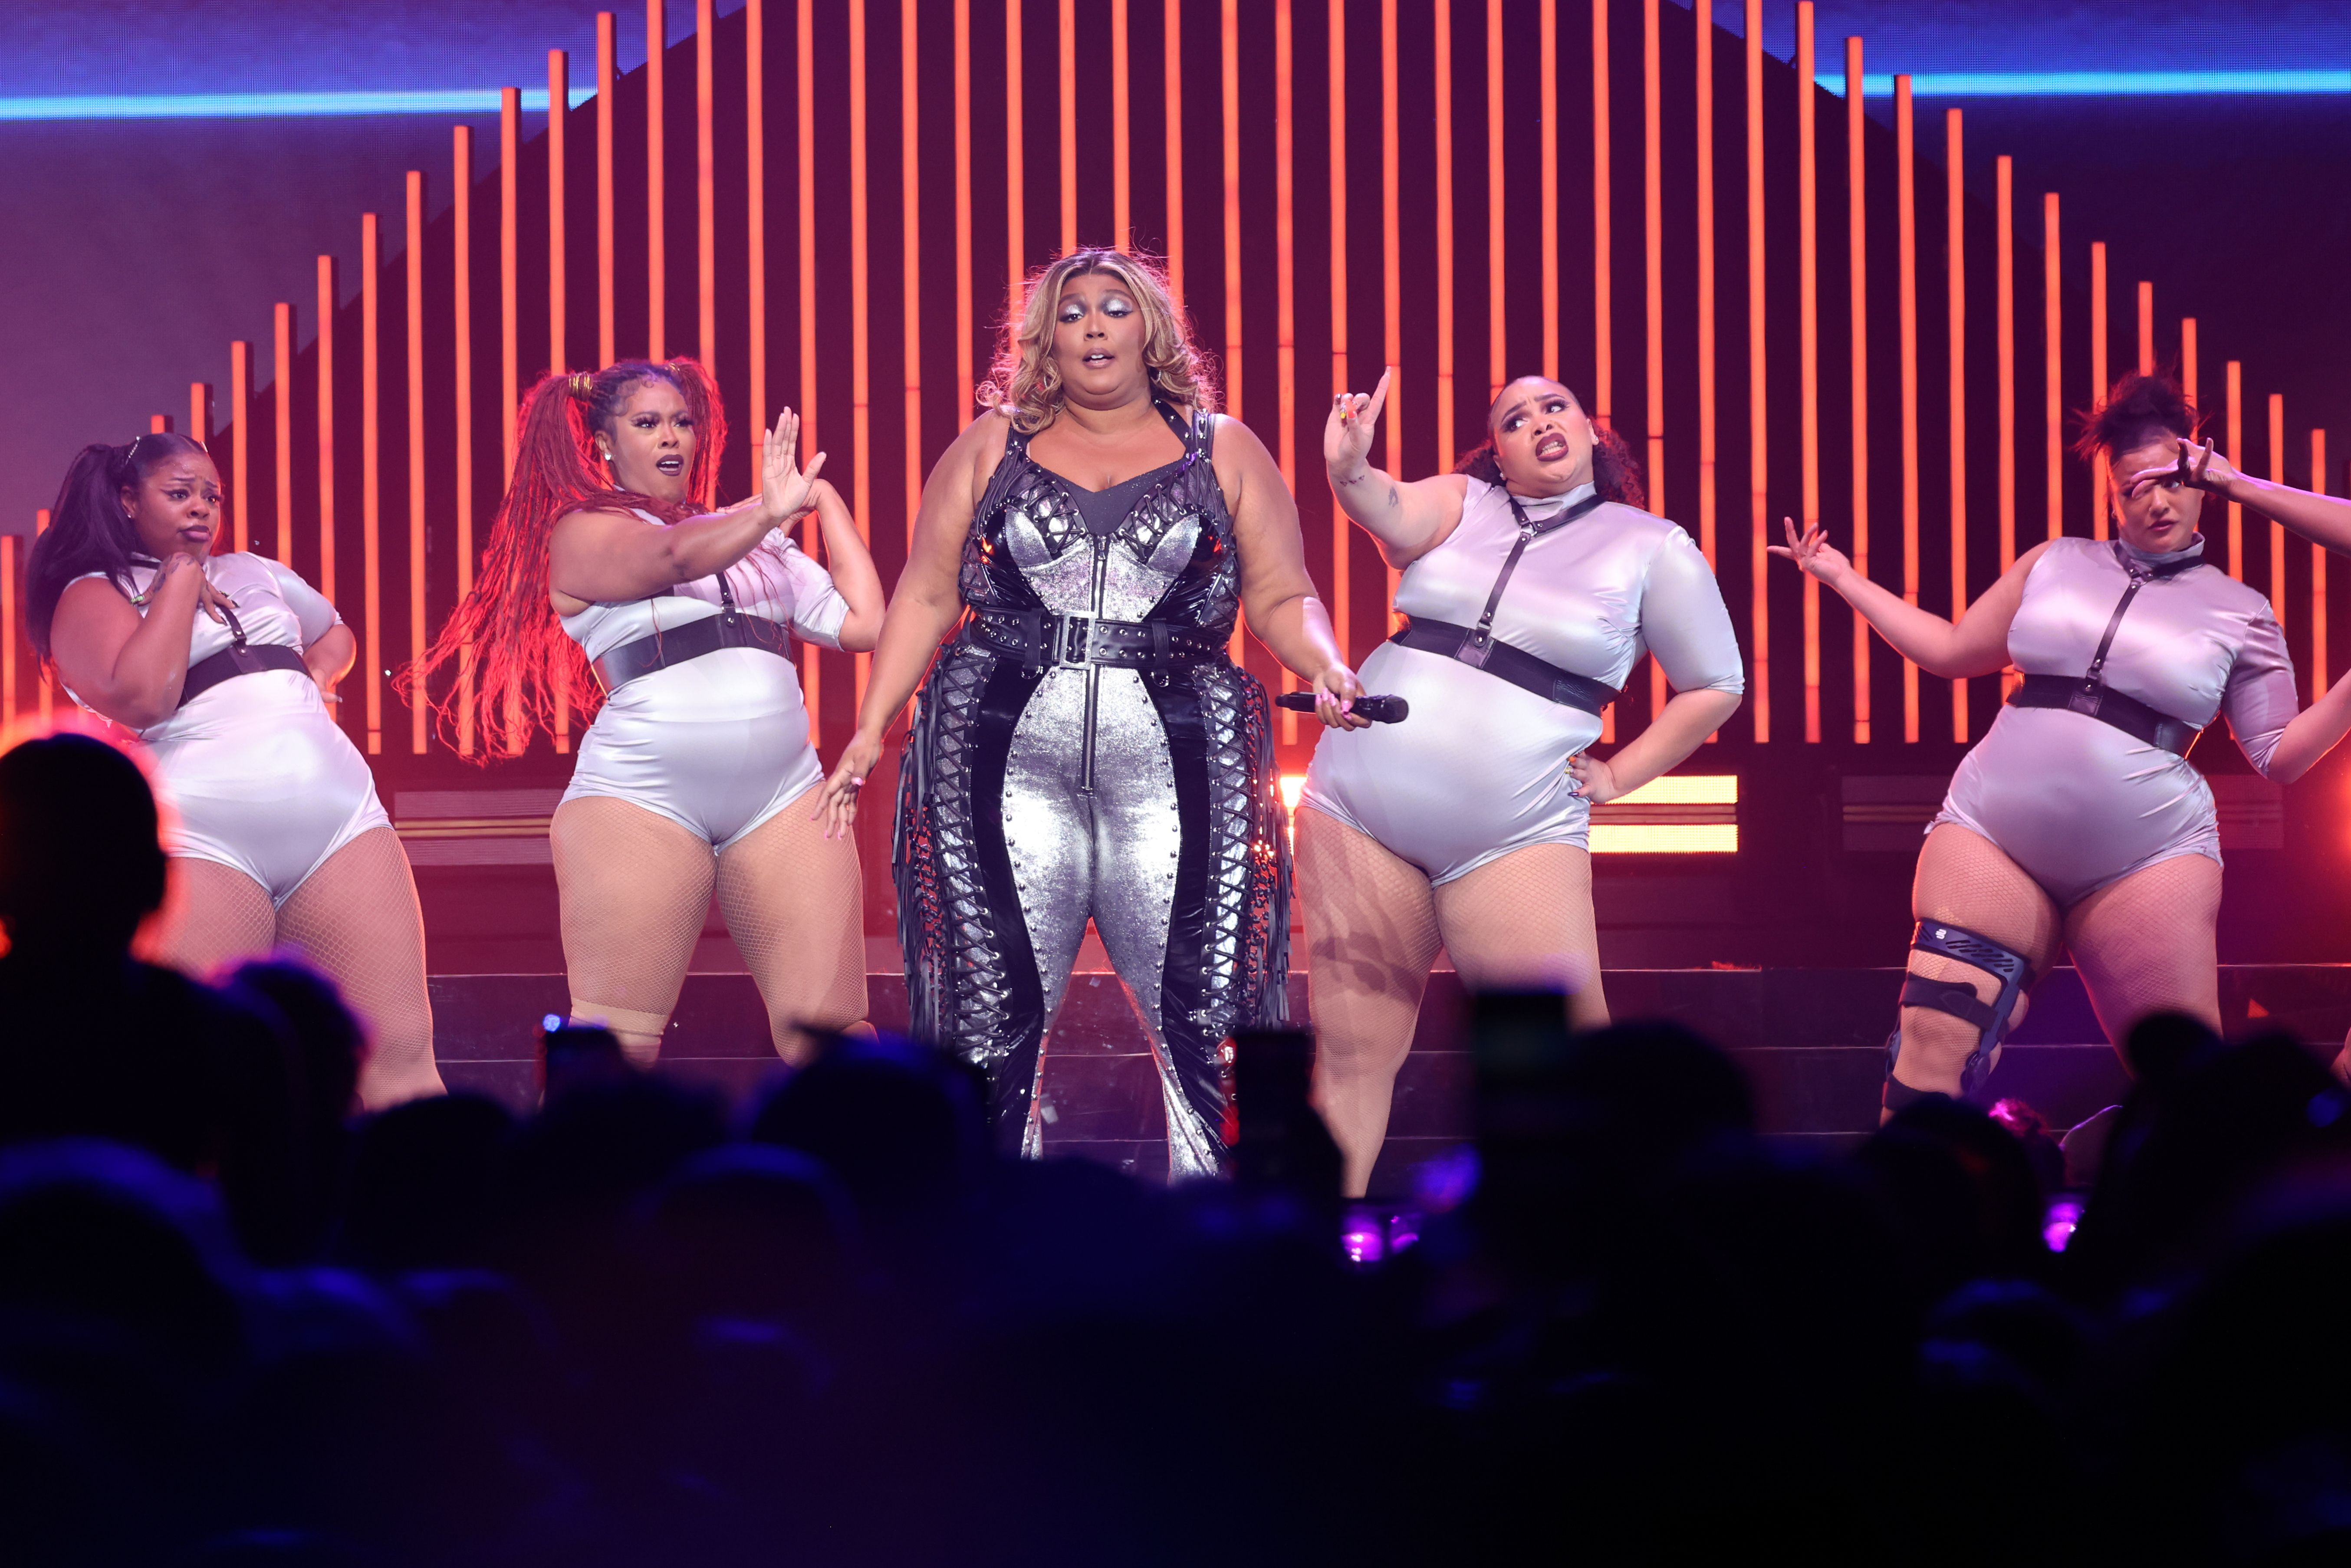 Lizzo Sued for Sexual Harassment by Former Dancers